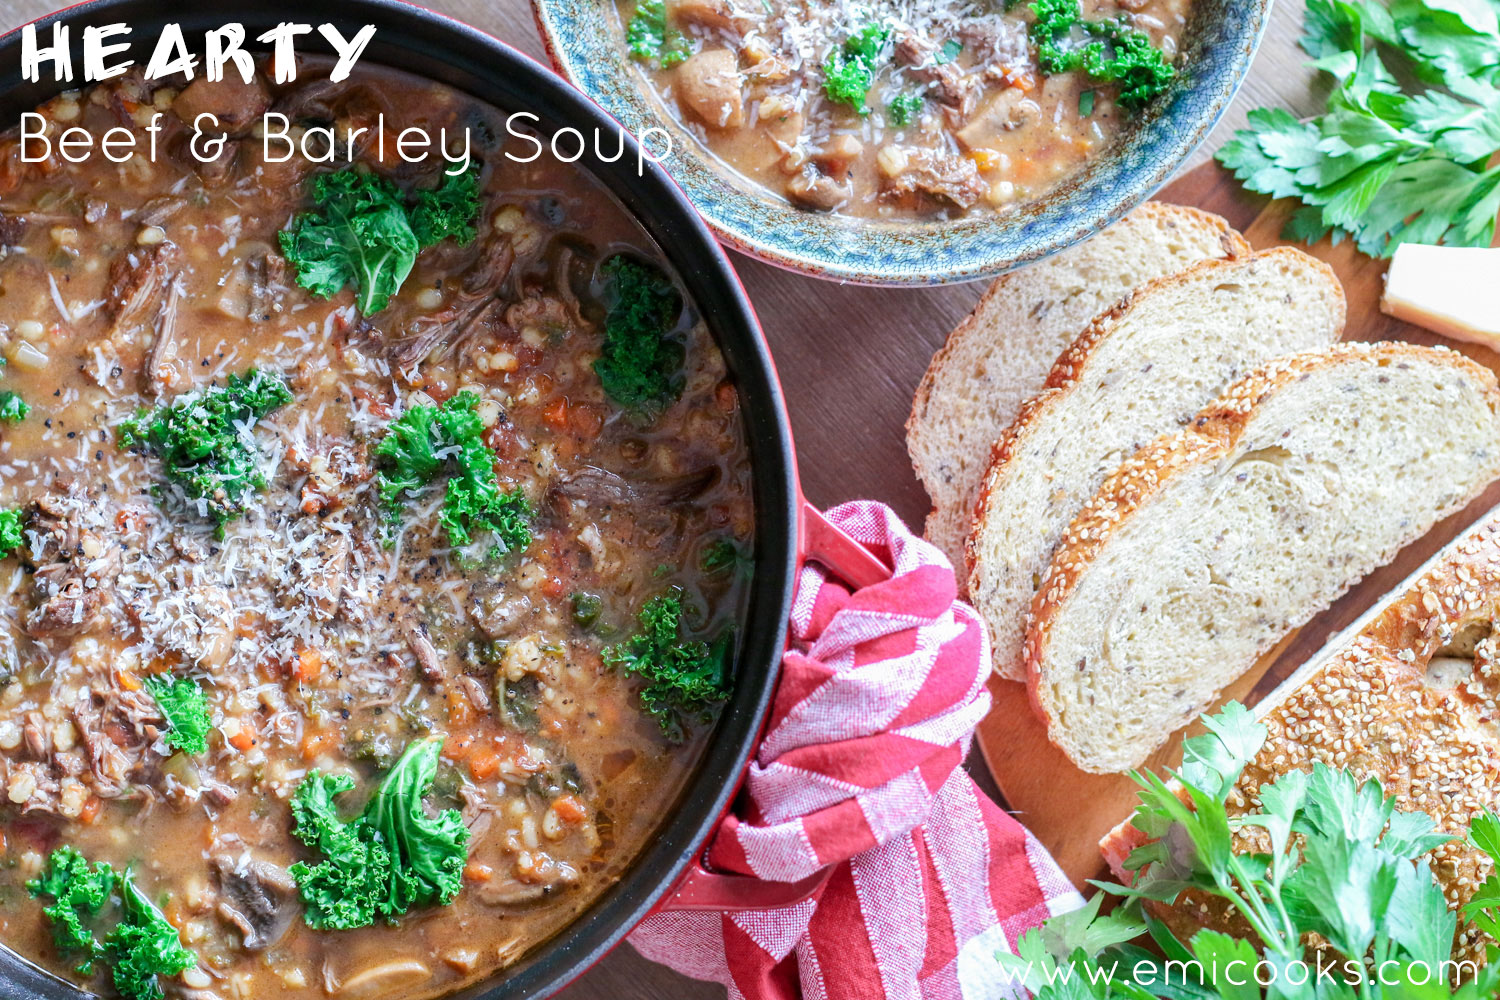 http://emicooks.com/wp-content/uploads/2017/02/Beef-Barley-Soup-OpenGraph.jpg